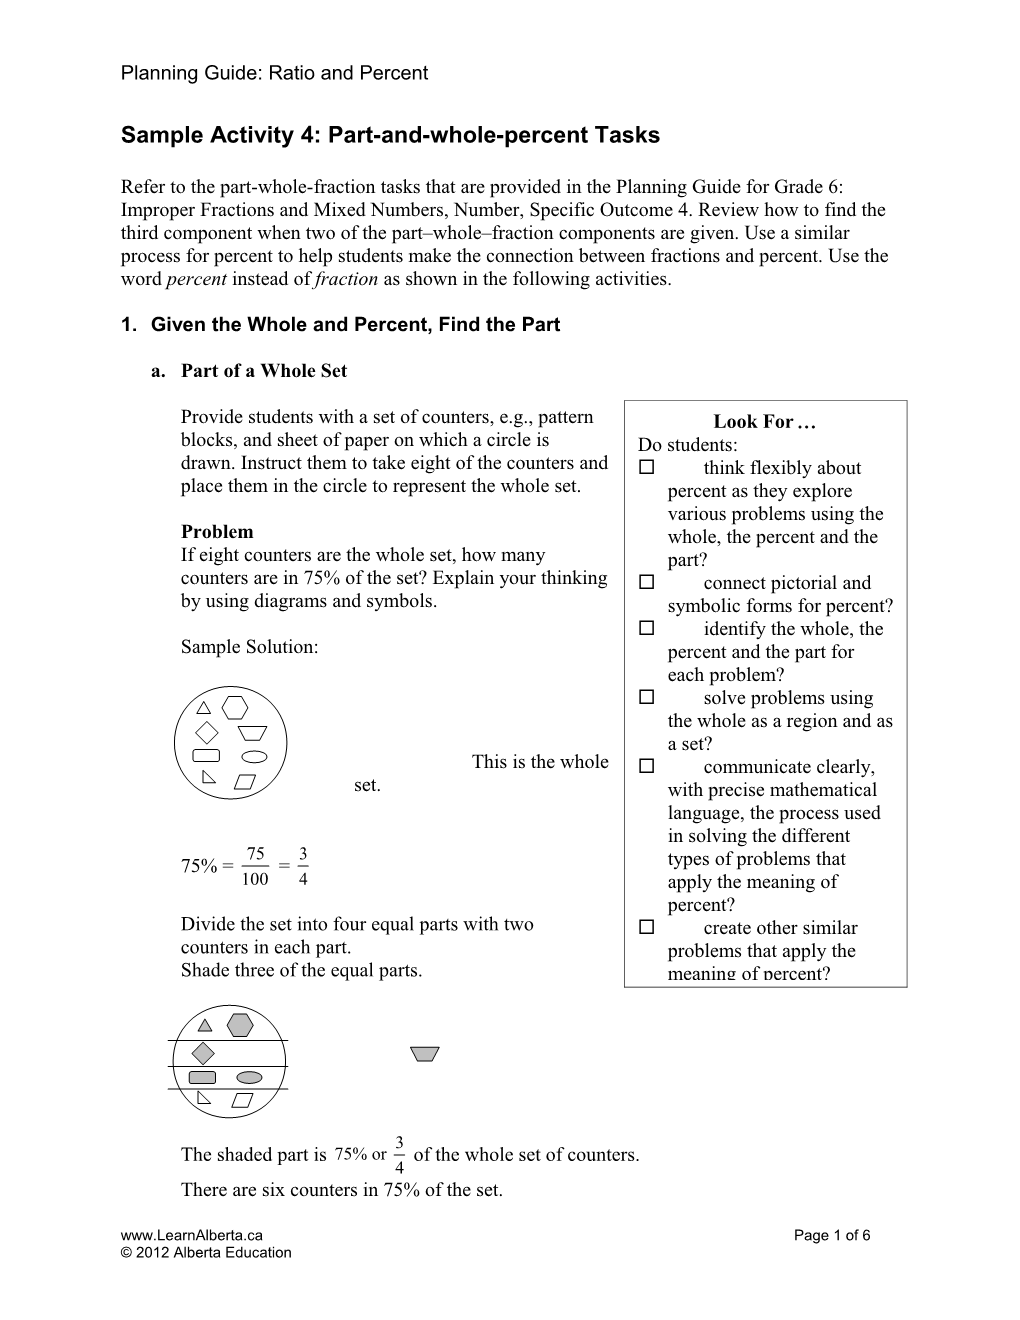 Sample Activity 4: Problem Solving with Patterns